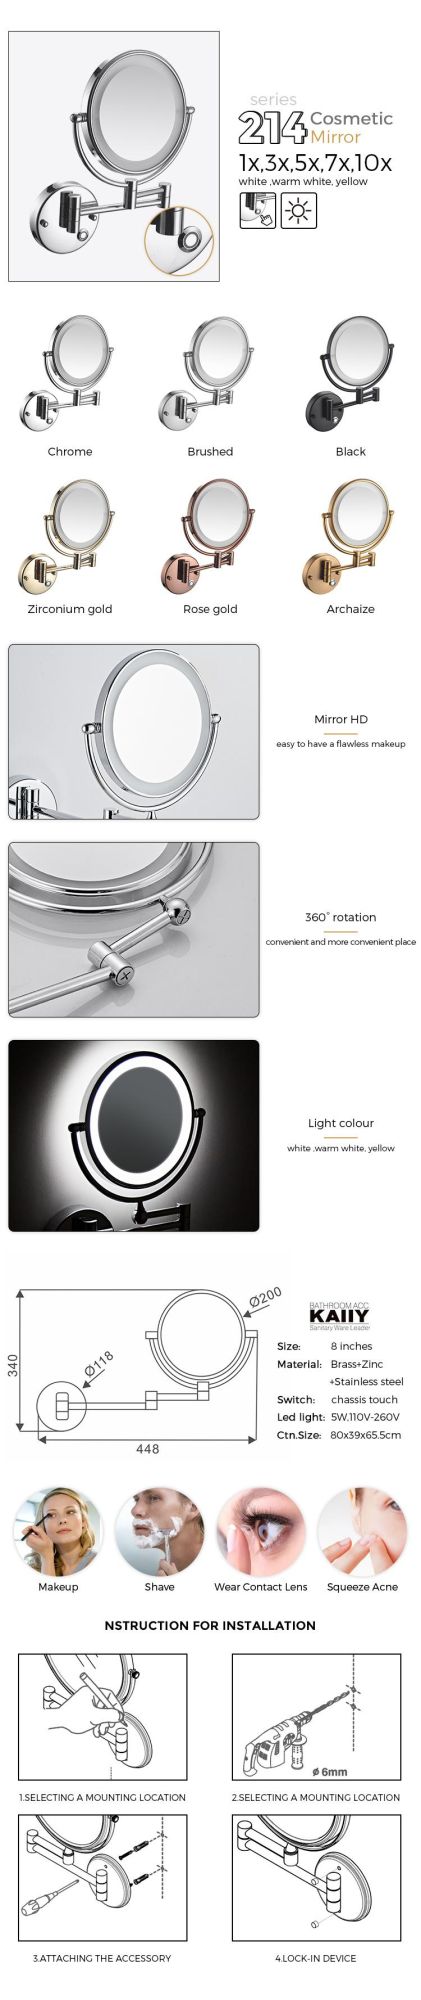 Kaiiy Colorful Modern Stainless Steel Wall Mounted Bathroom Accessories Dual Arm Extend Bath LED Mirrors